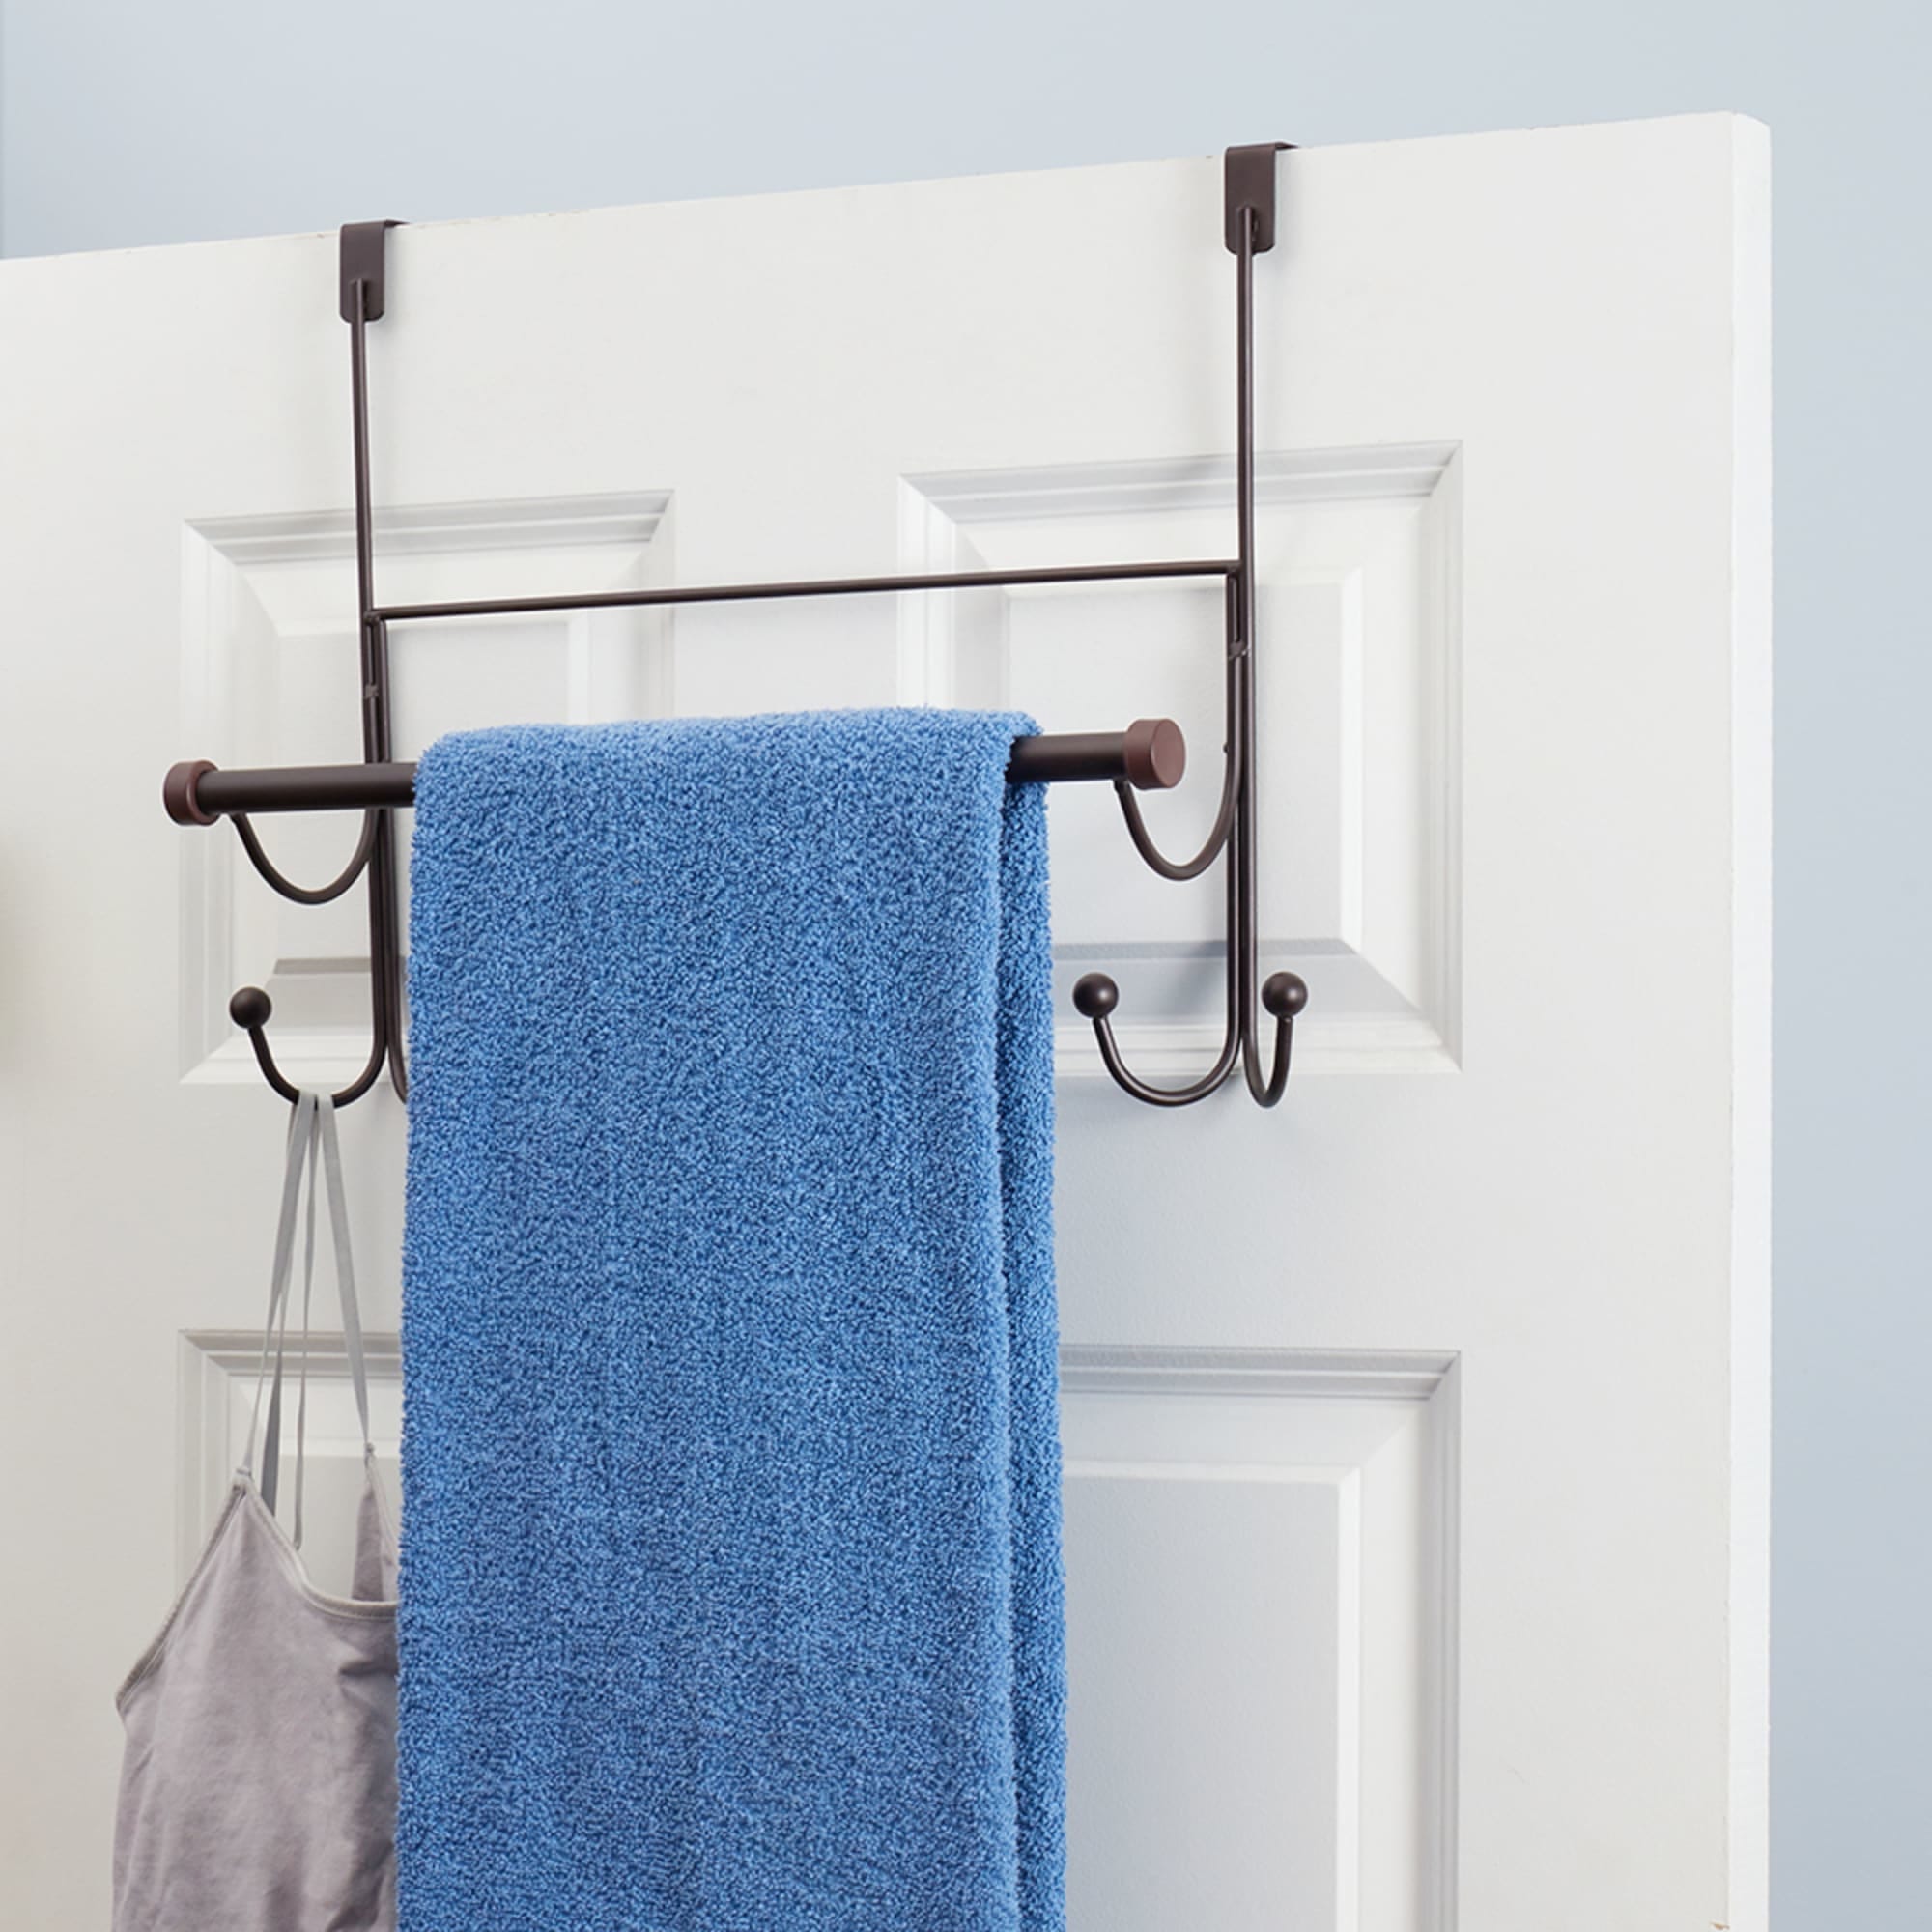 Home Basics Over the Door Hook with Towel Bar, Oil-Rubbed Bronze $10.00 EACH, CASE PACK OF 8